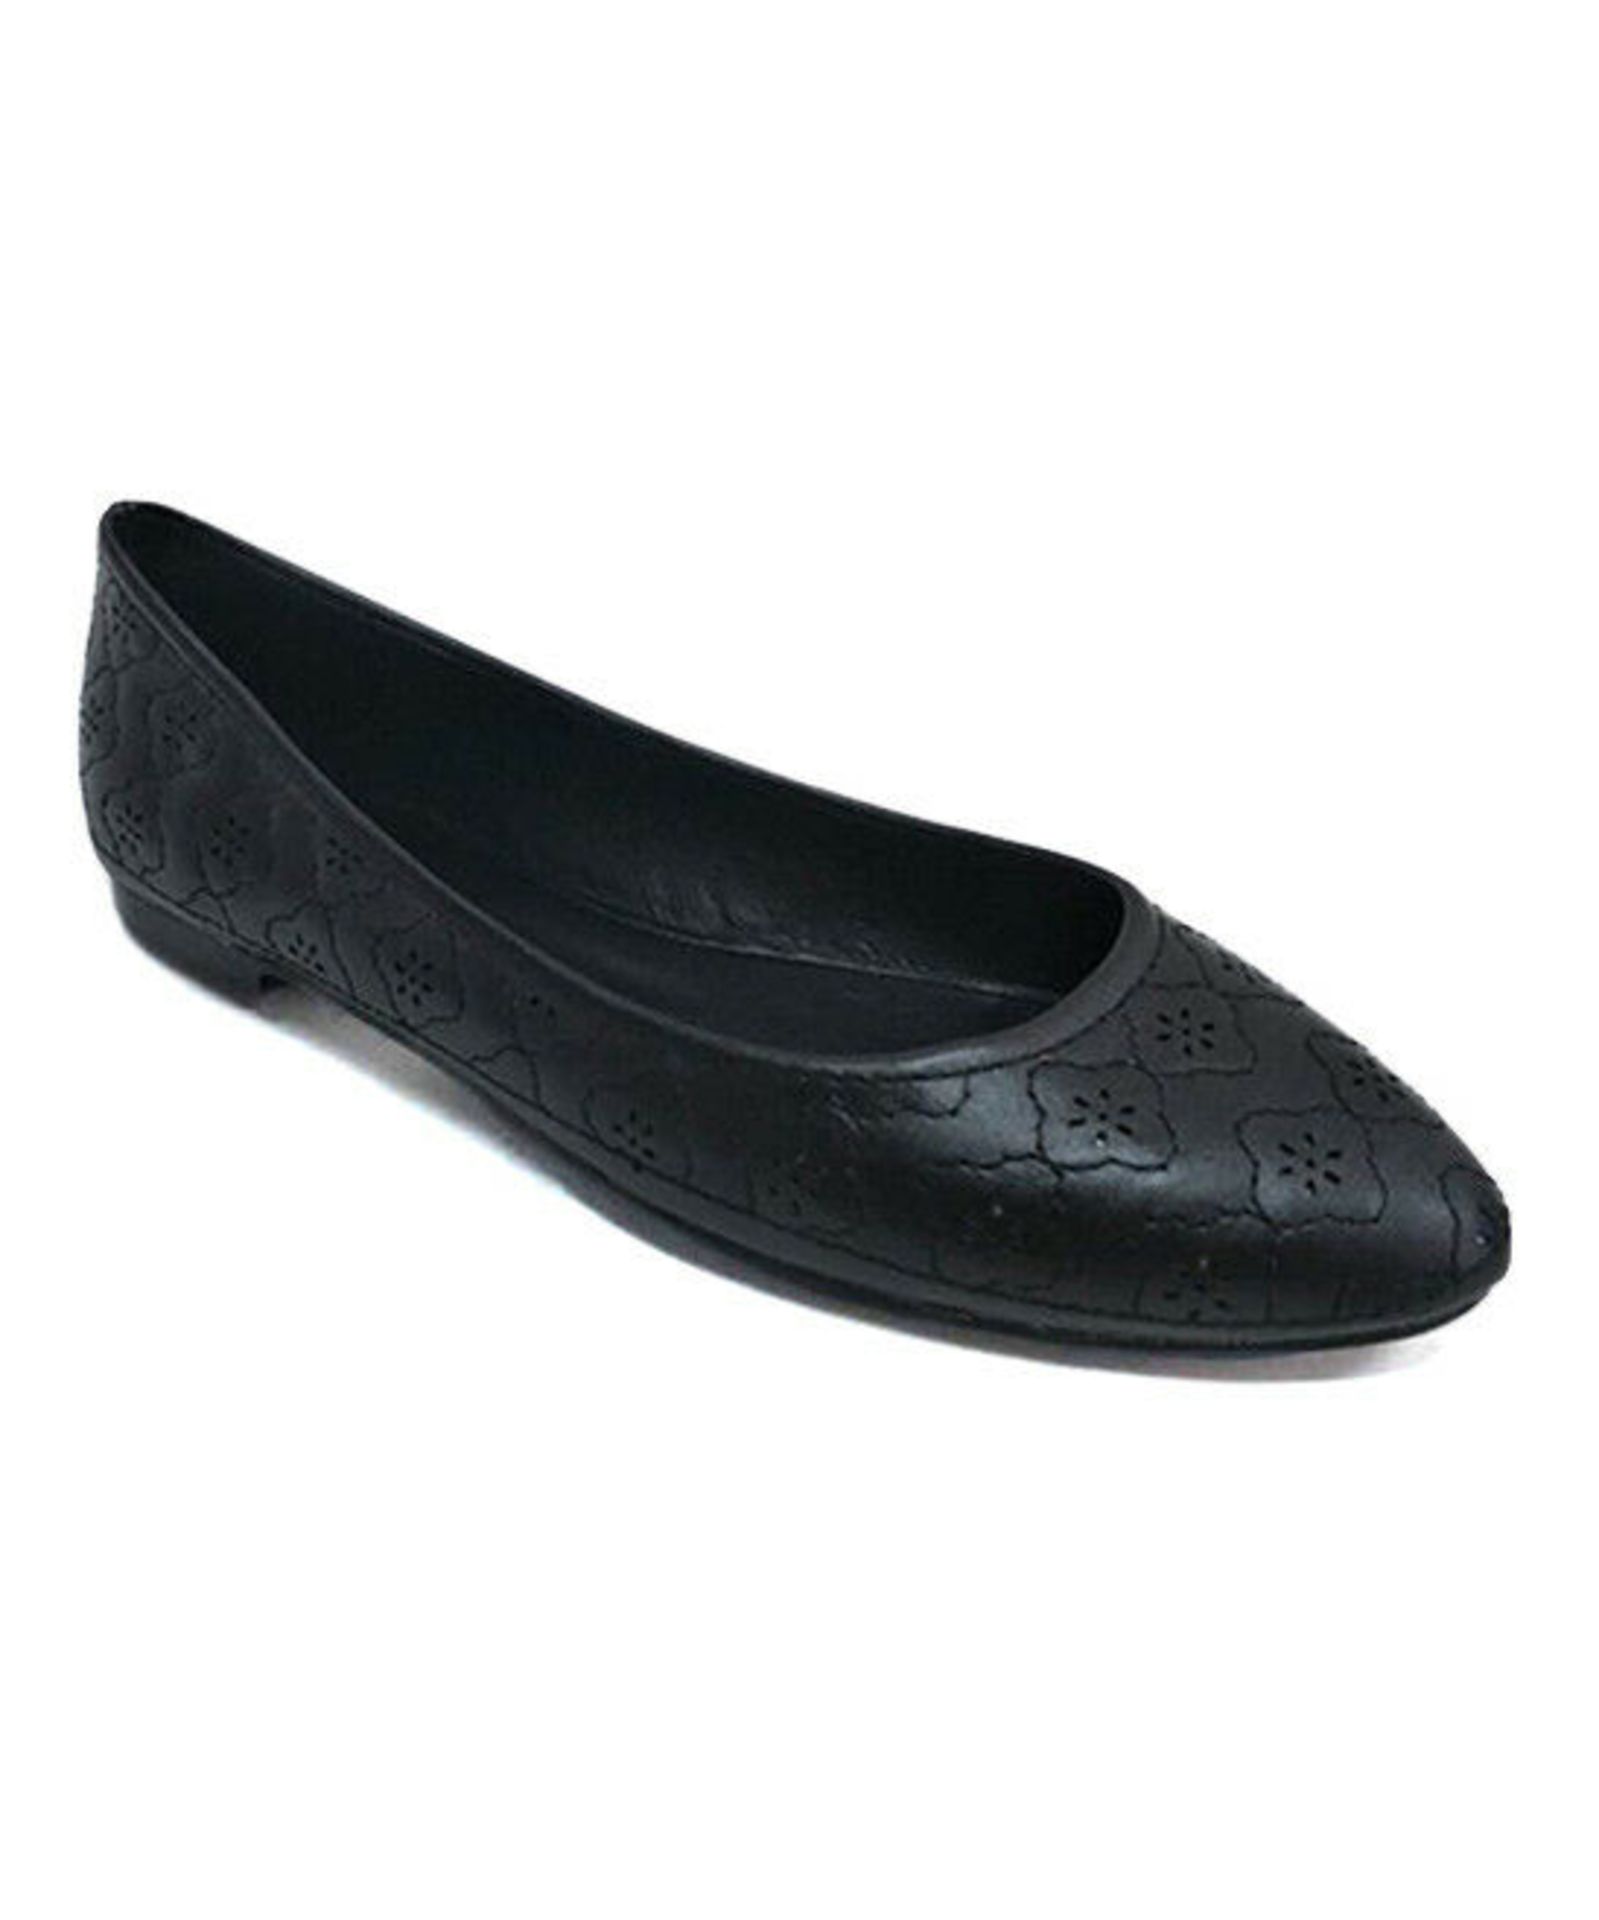 M & L Black Floral Embossed Ballet Flat (Uk Size:8/Us Size:10) (New With Box) [Ref: 50246431-D-002]